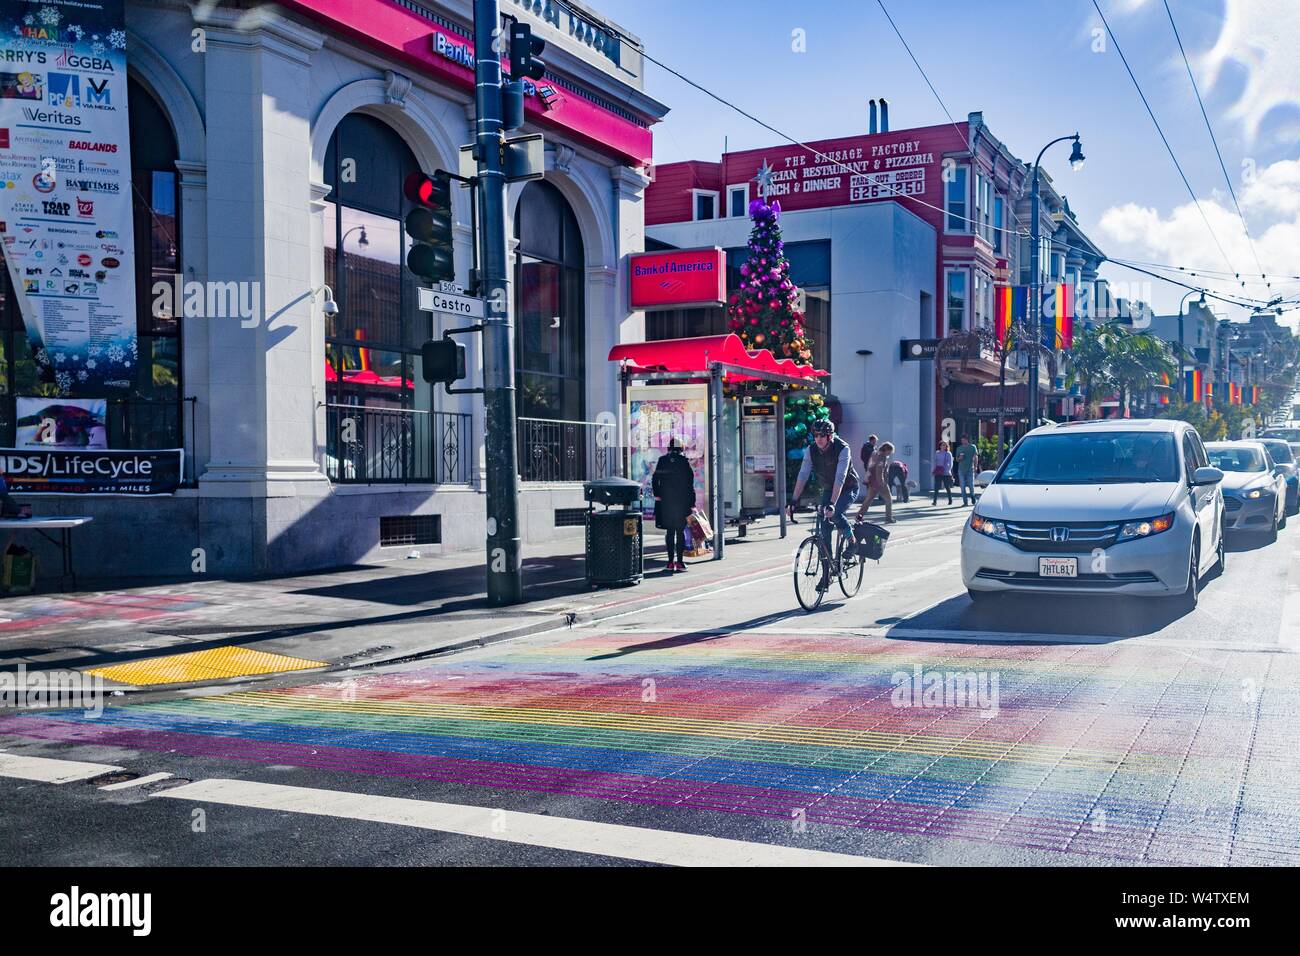 Cyclists and cars are visible approaching the Rainbow Crosswalk, part of the Rainbow Honor Walk commemorating LGBT leaders, on Castro Street in the Castro District of San Francisco, California, known as one of the major centers of LGBT culture in the United States, December, 2018. () Stock Photo